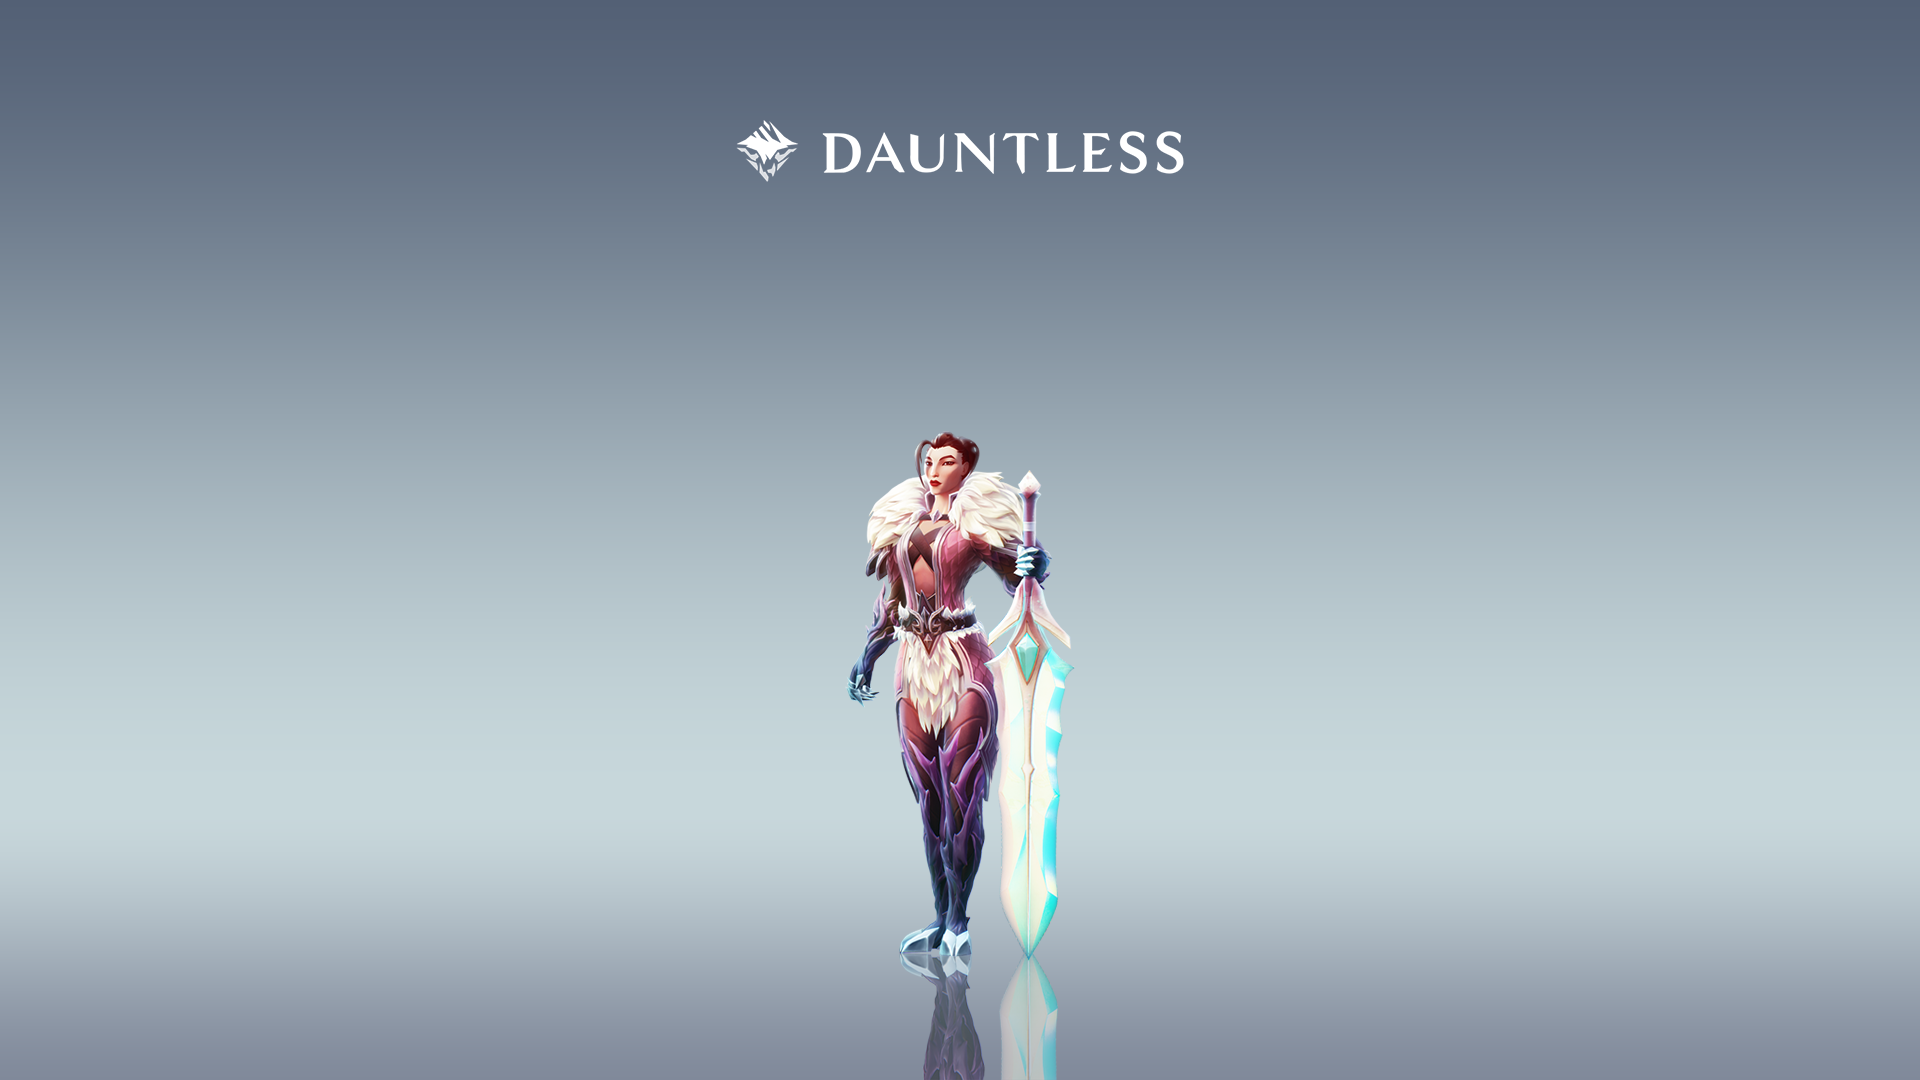 Here's Some Dauntless Weapon Wallpaper I Made. [Light Theme]